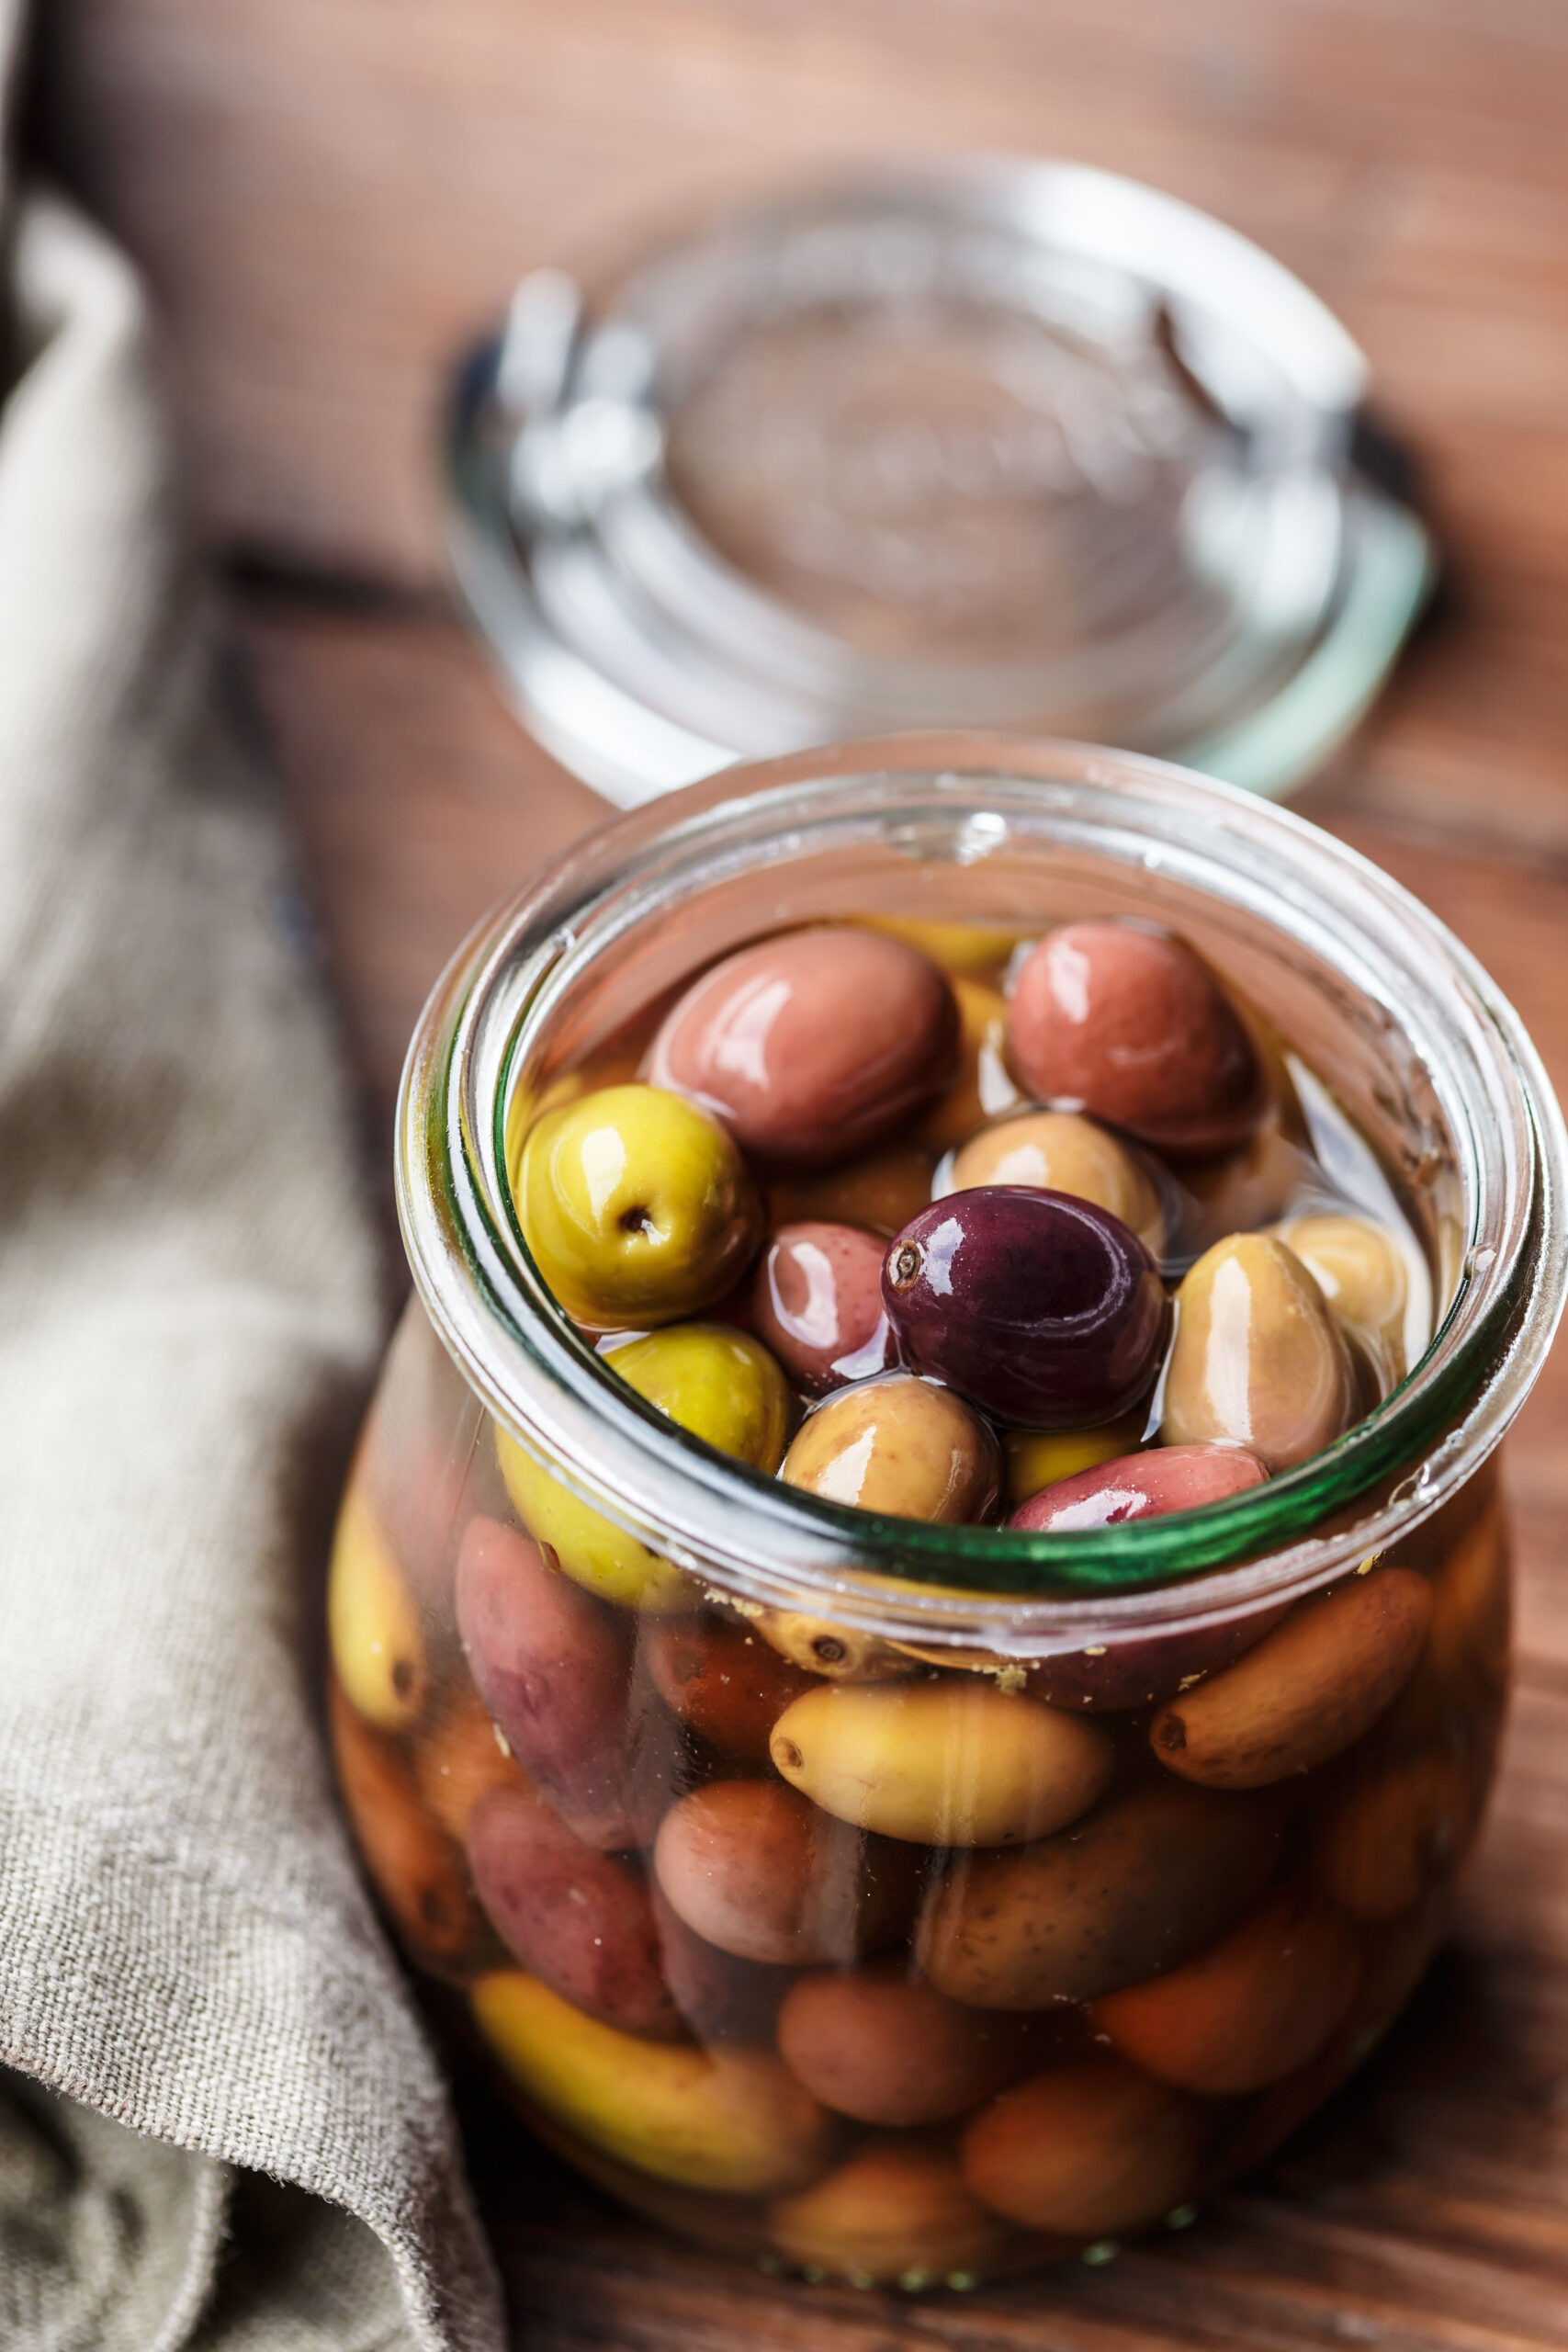 Make your own olives in brine